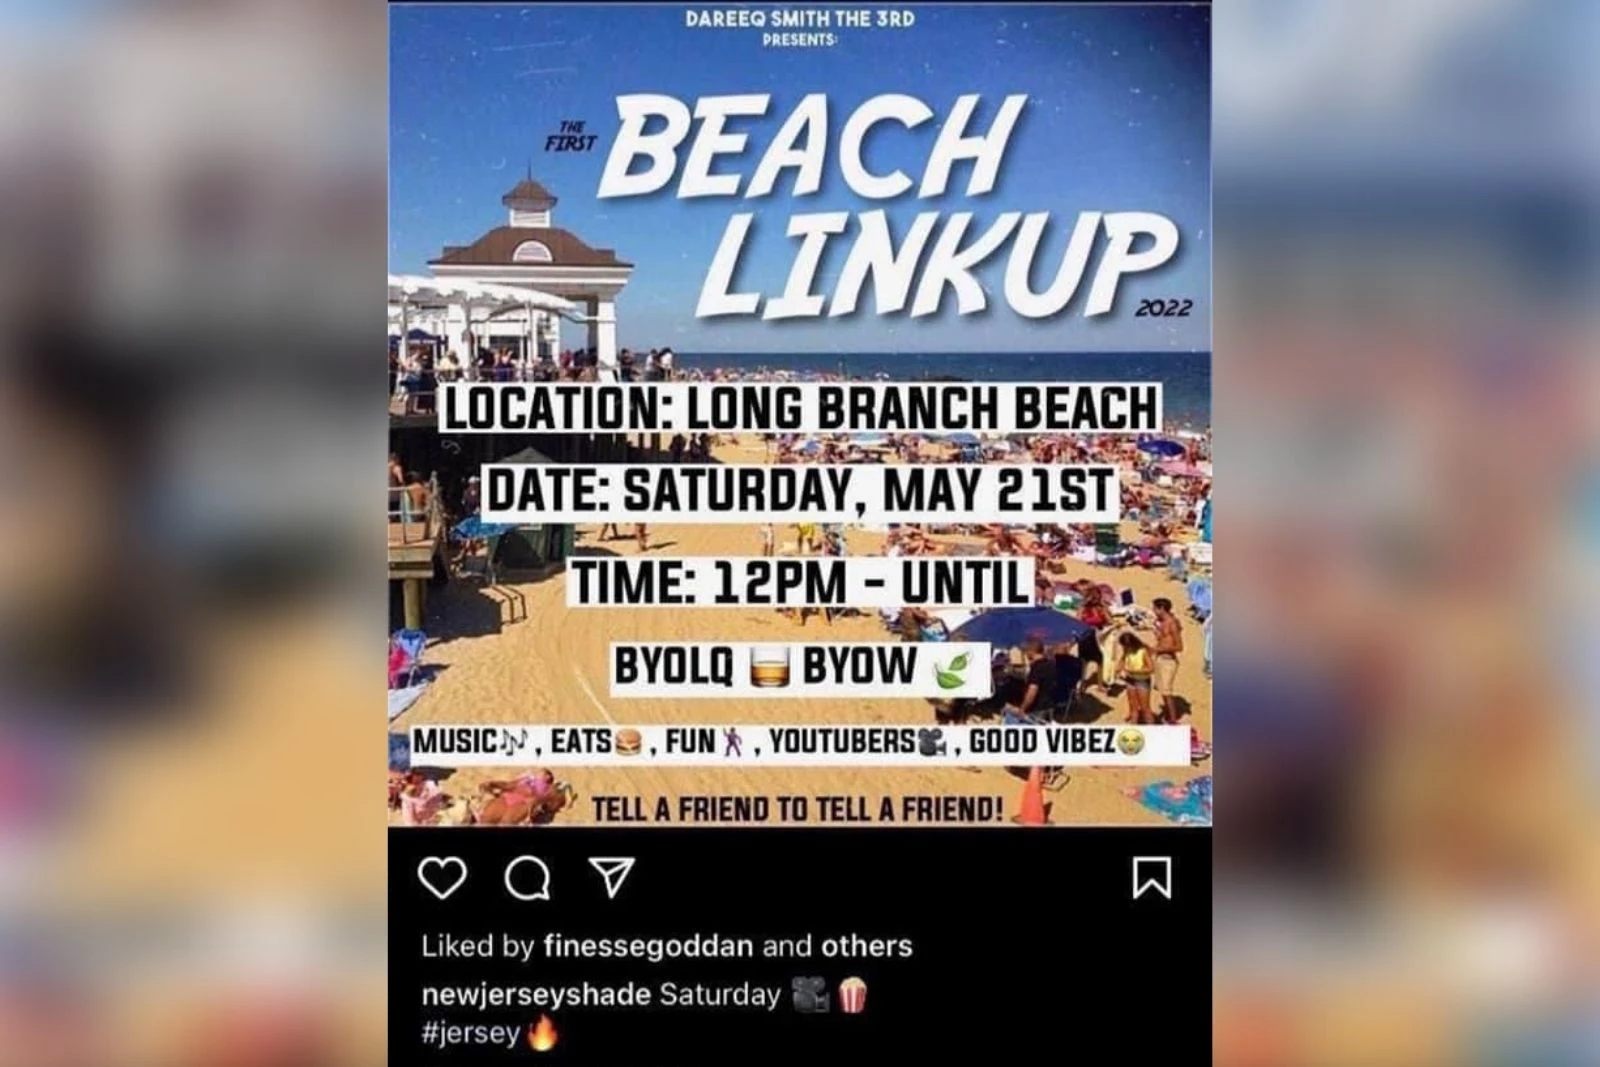 Enough': Long Branch sues those it says started huge 'pop-up' Pier